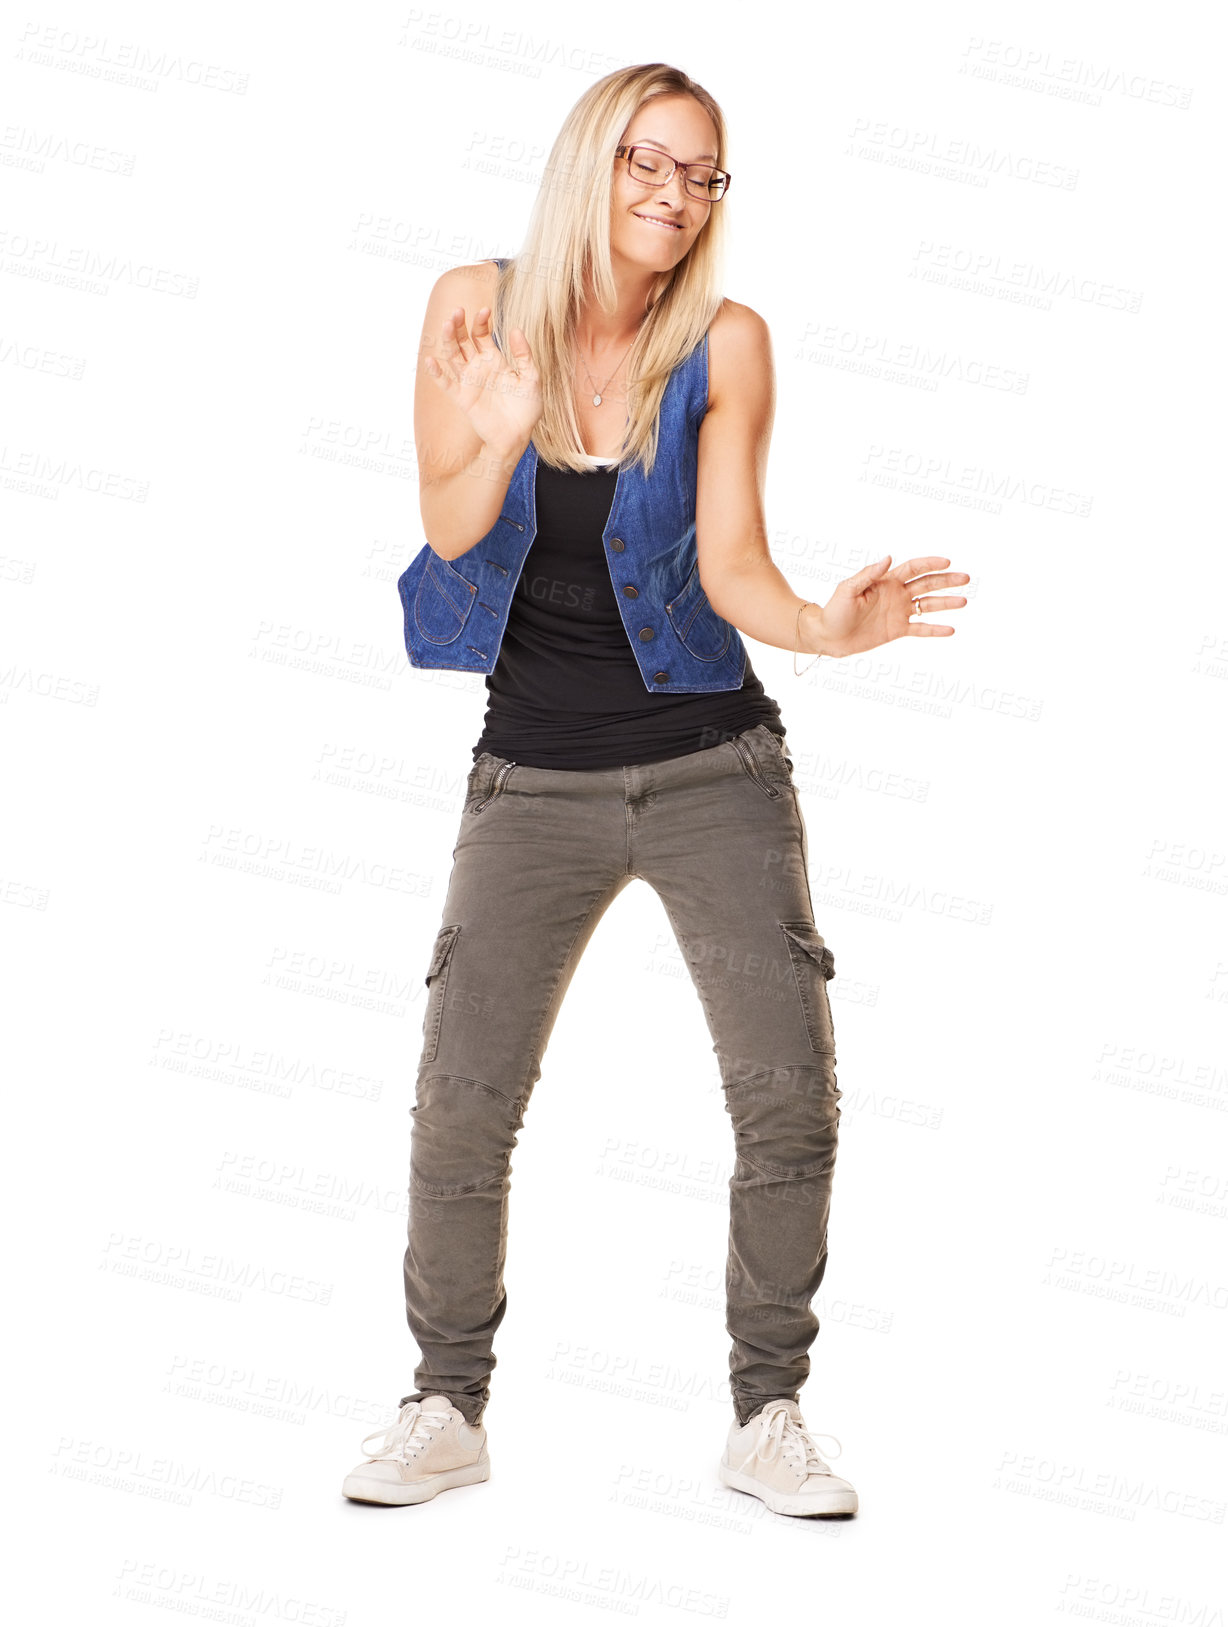 Buy stock photo Dance, playful and woman moving with a smile, excited and happy on a white background in studio. Comic, funny and hip hop dancer dancing with movement, confidence and happiness on a studio background